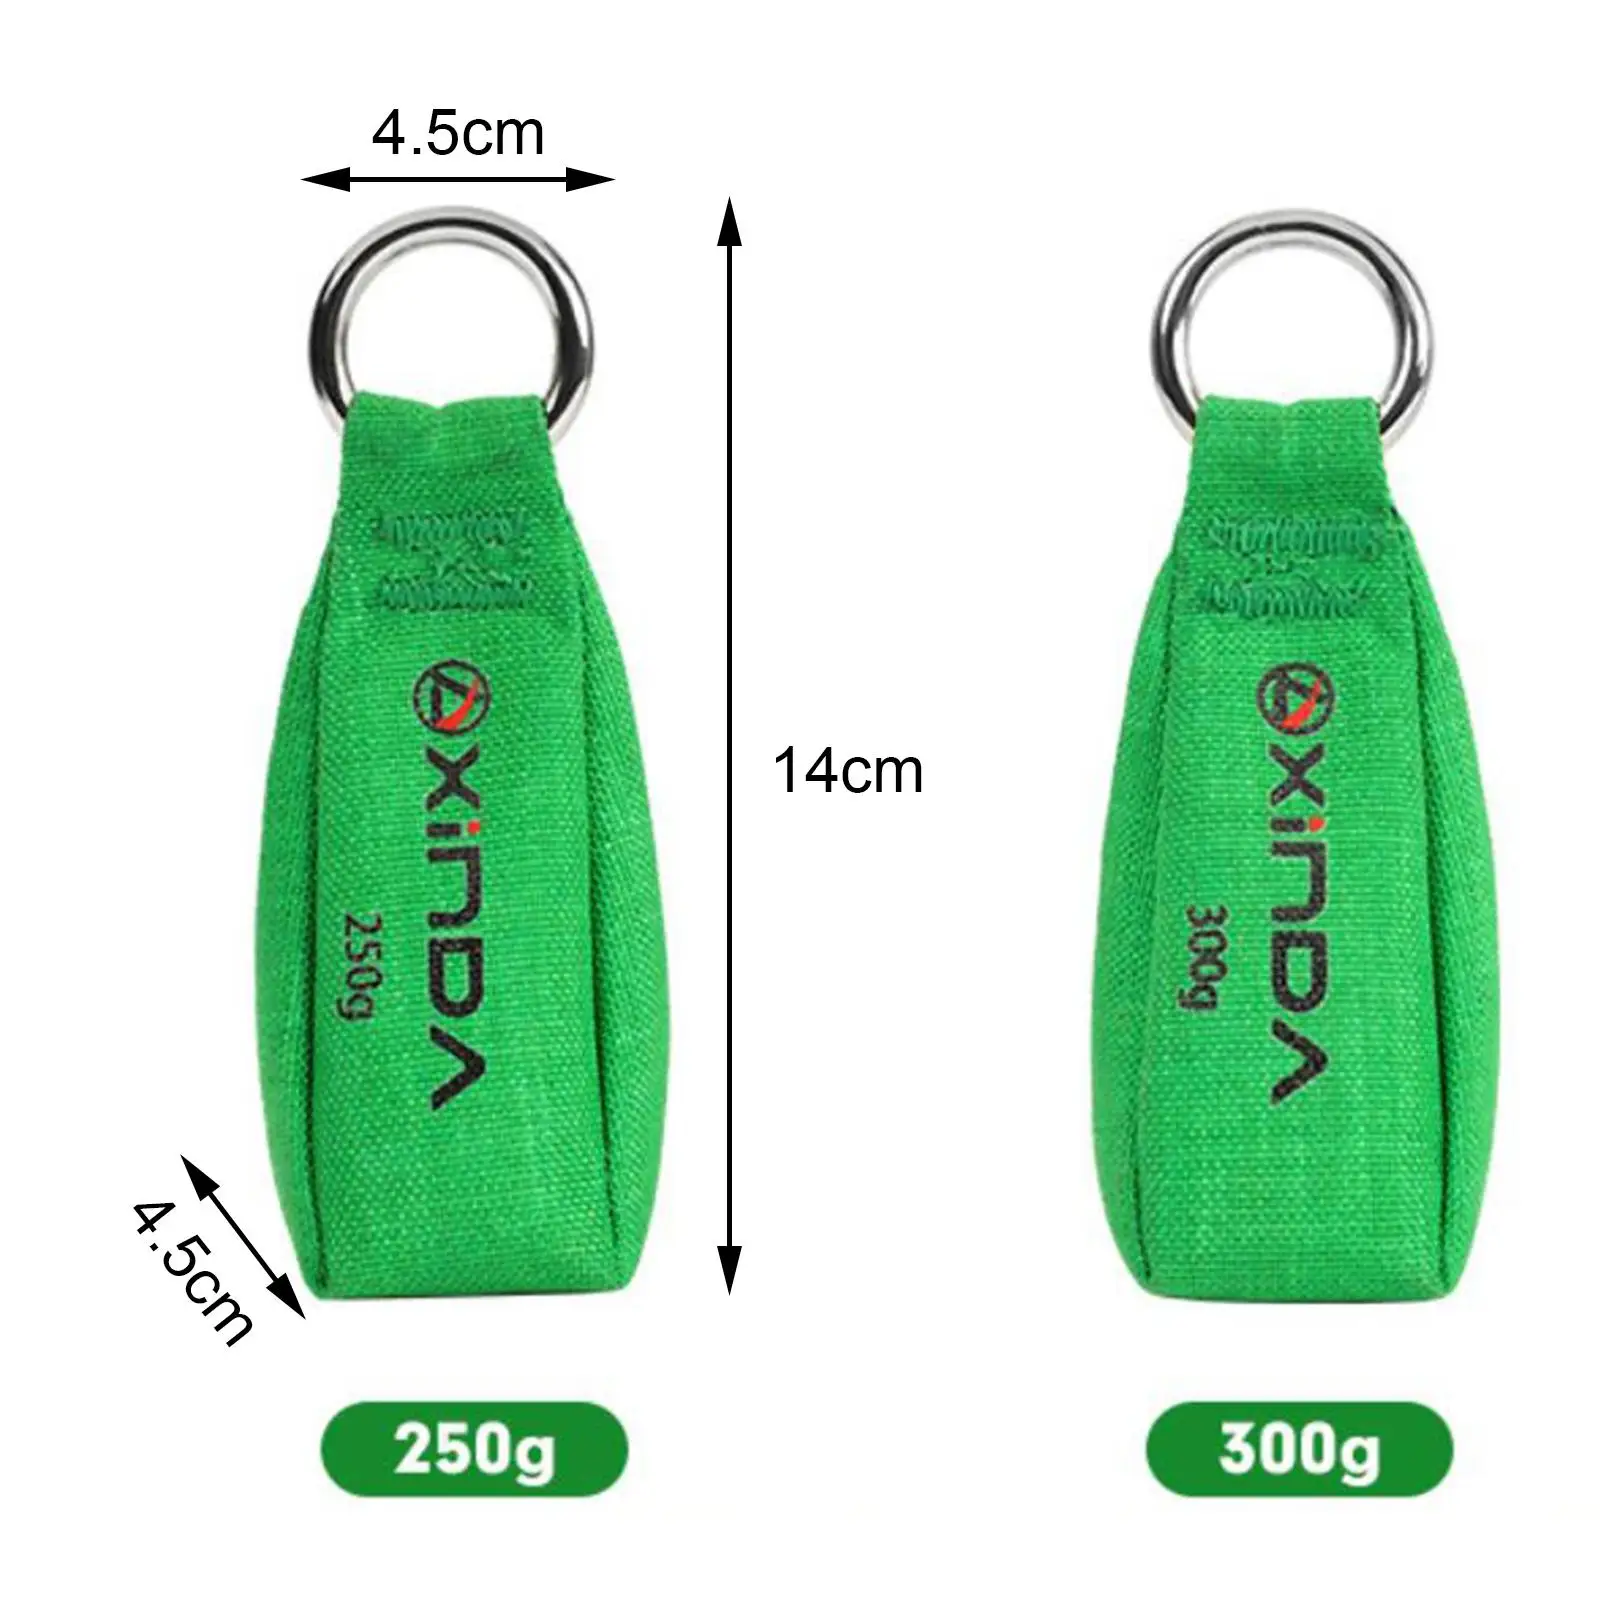  Throw Weight Bag Nylon Fabric Portable Throwing Bag with Metal Loop for Outdoor Sports Rock Climbing Mountaineering